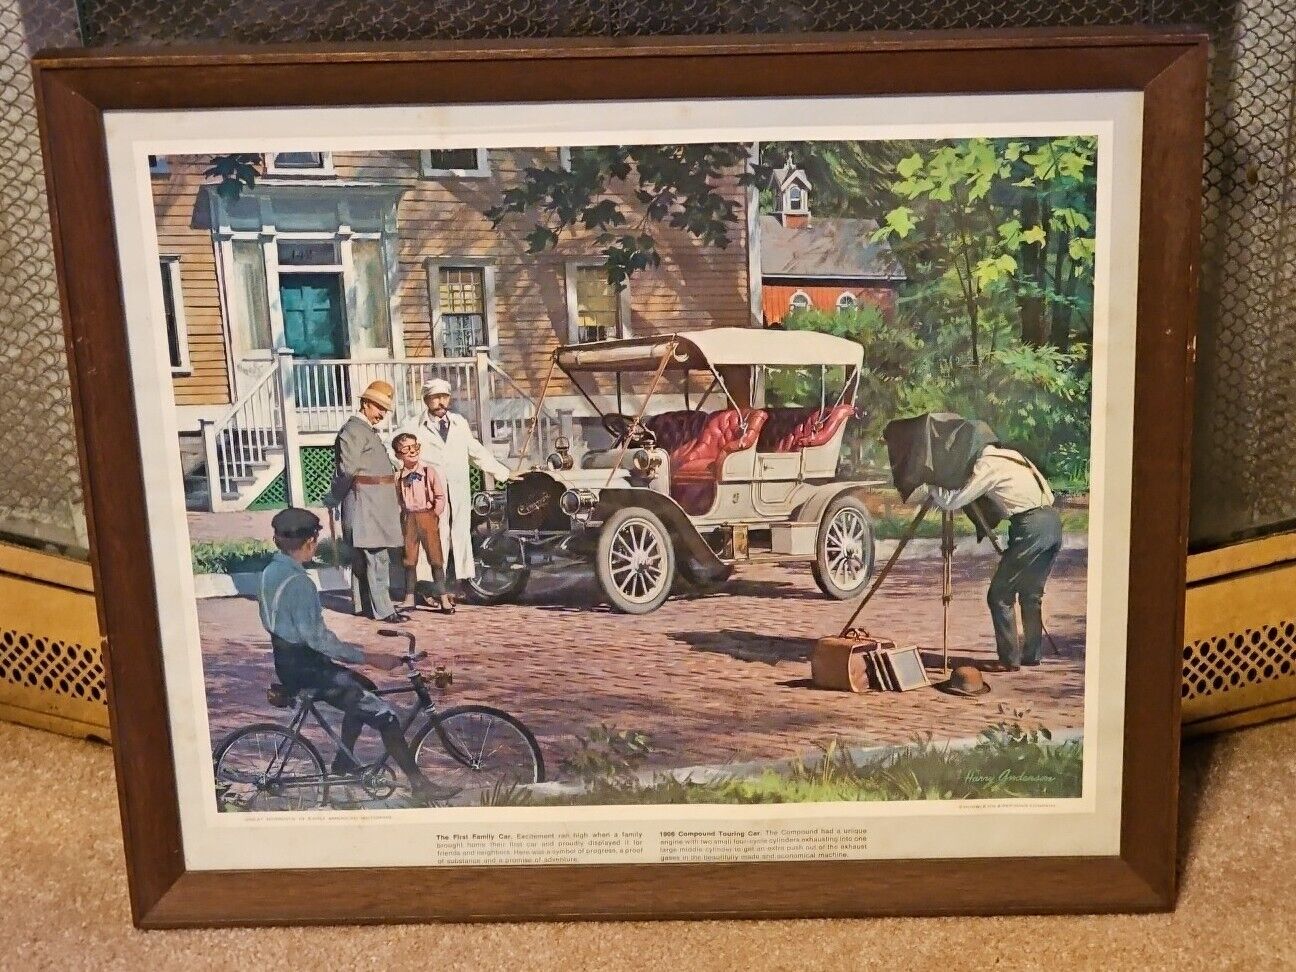 Vintage Humble Oil Poster Print 1906 Compound Touring Car Artist Harry Anderson